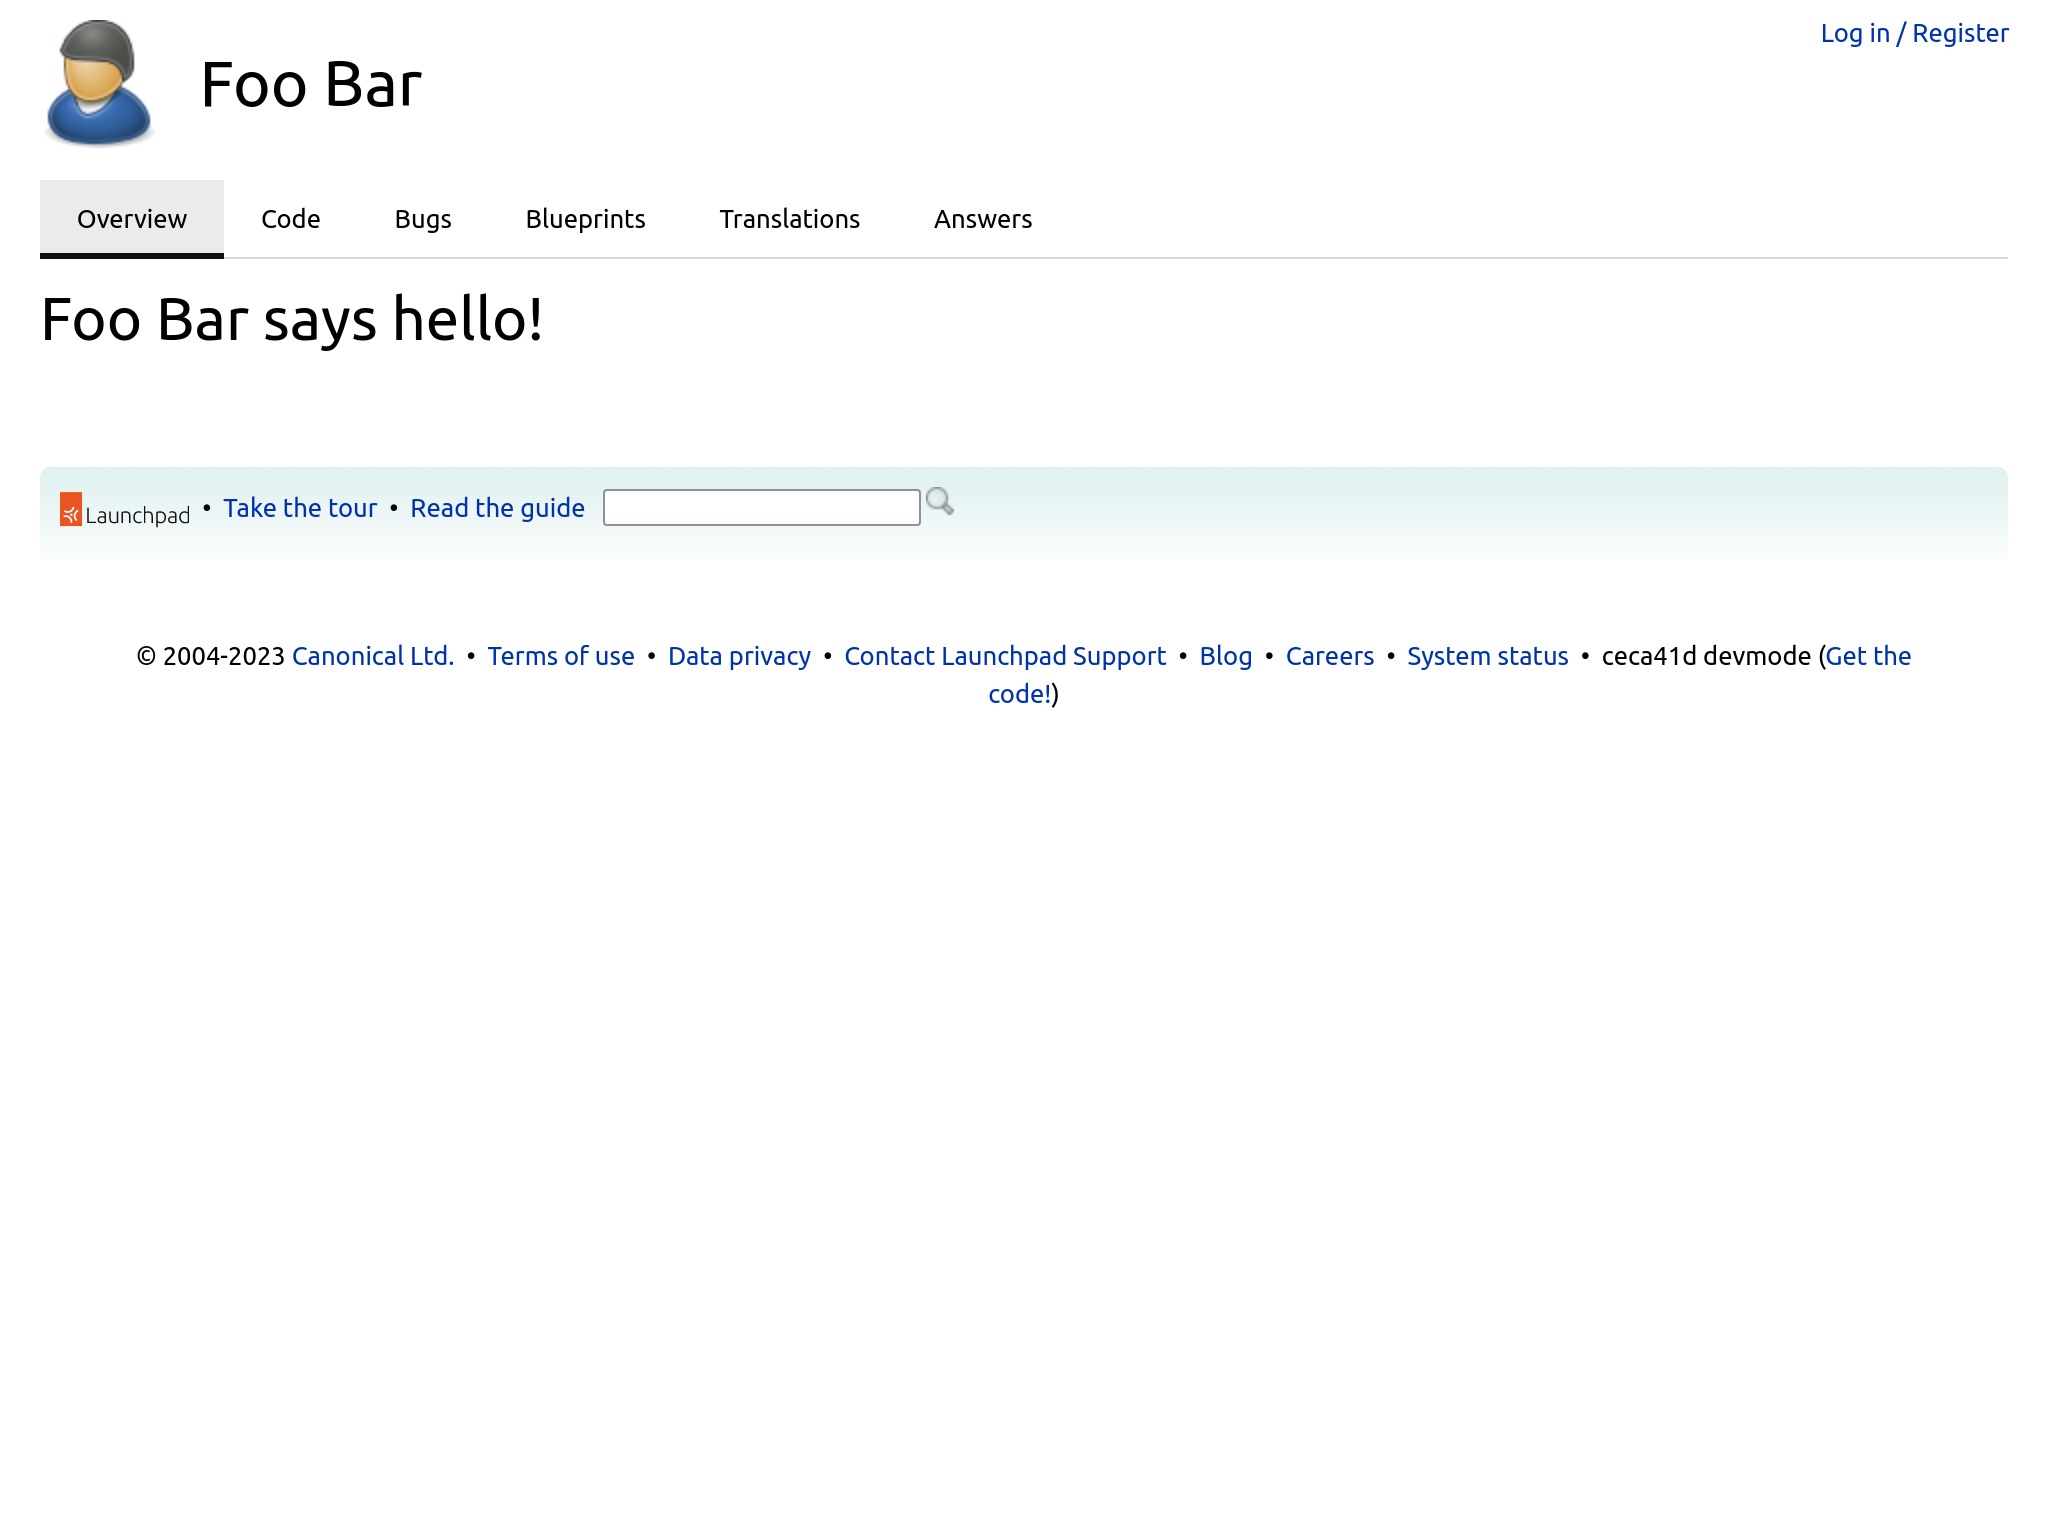 A screenshot of a Launchpad page showing a hello message from a user